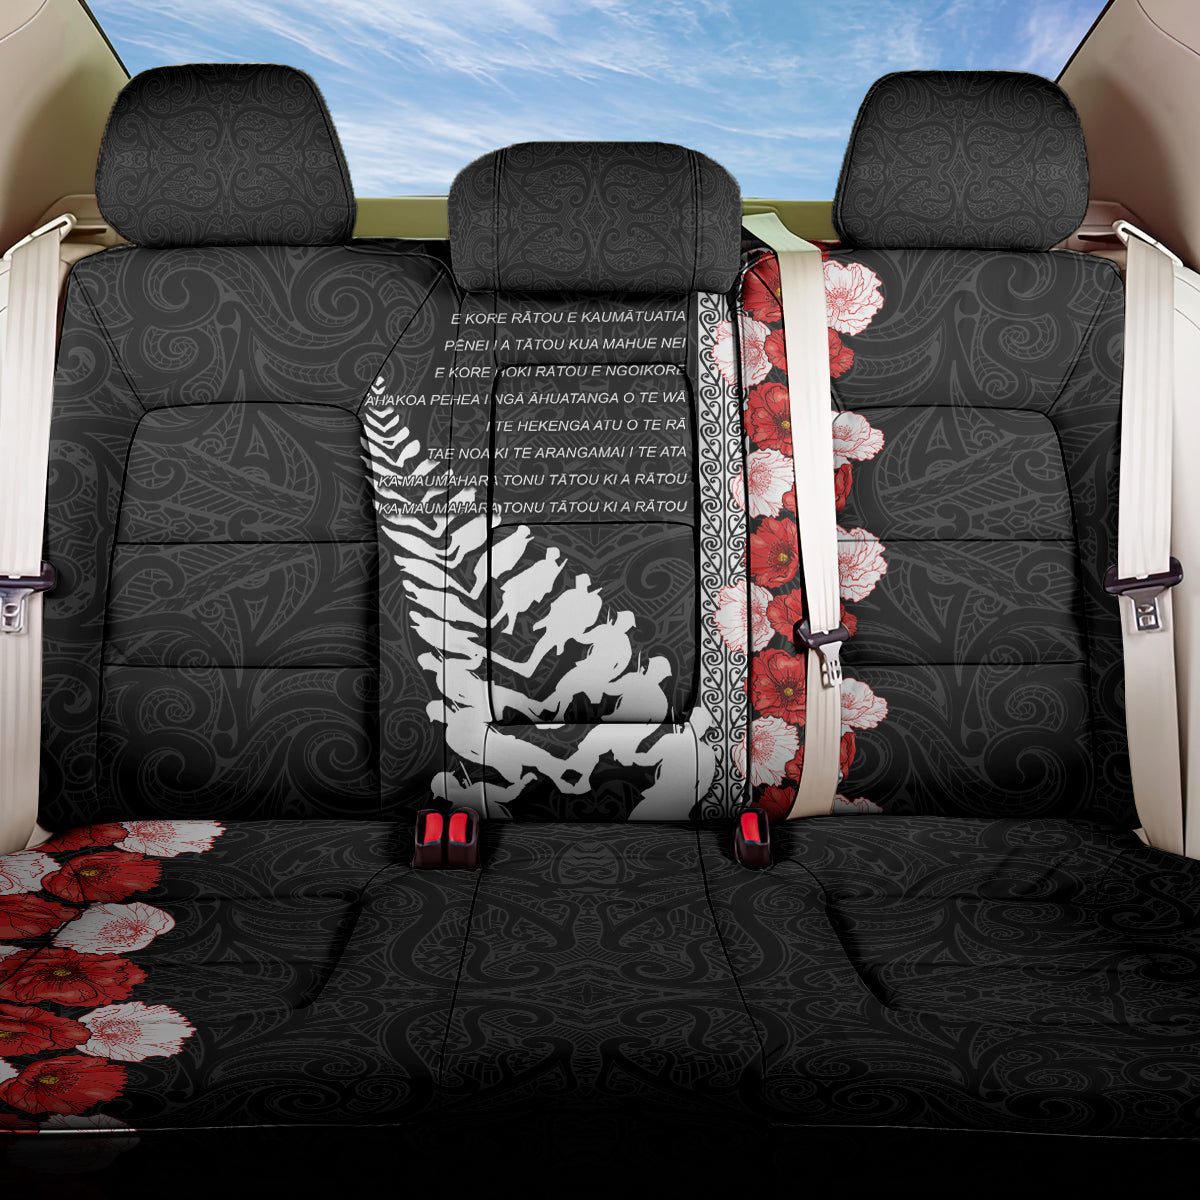 New Zealand ANZAC Day Back Car Seat Cover Soldier Silver Fern with Red Poppies Flower Maori Style LT03